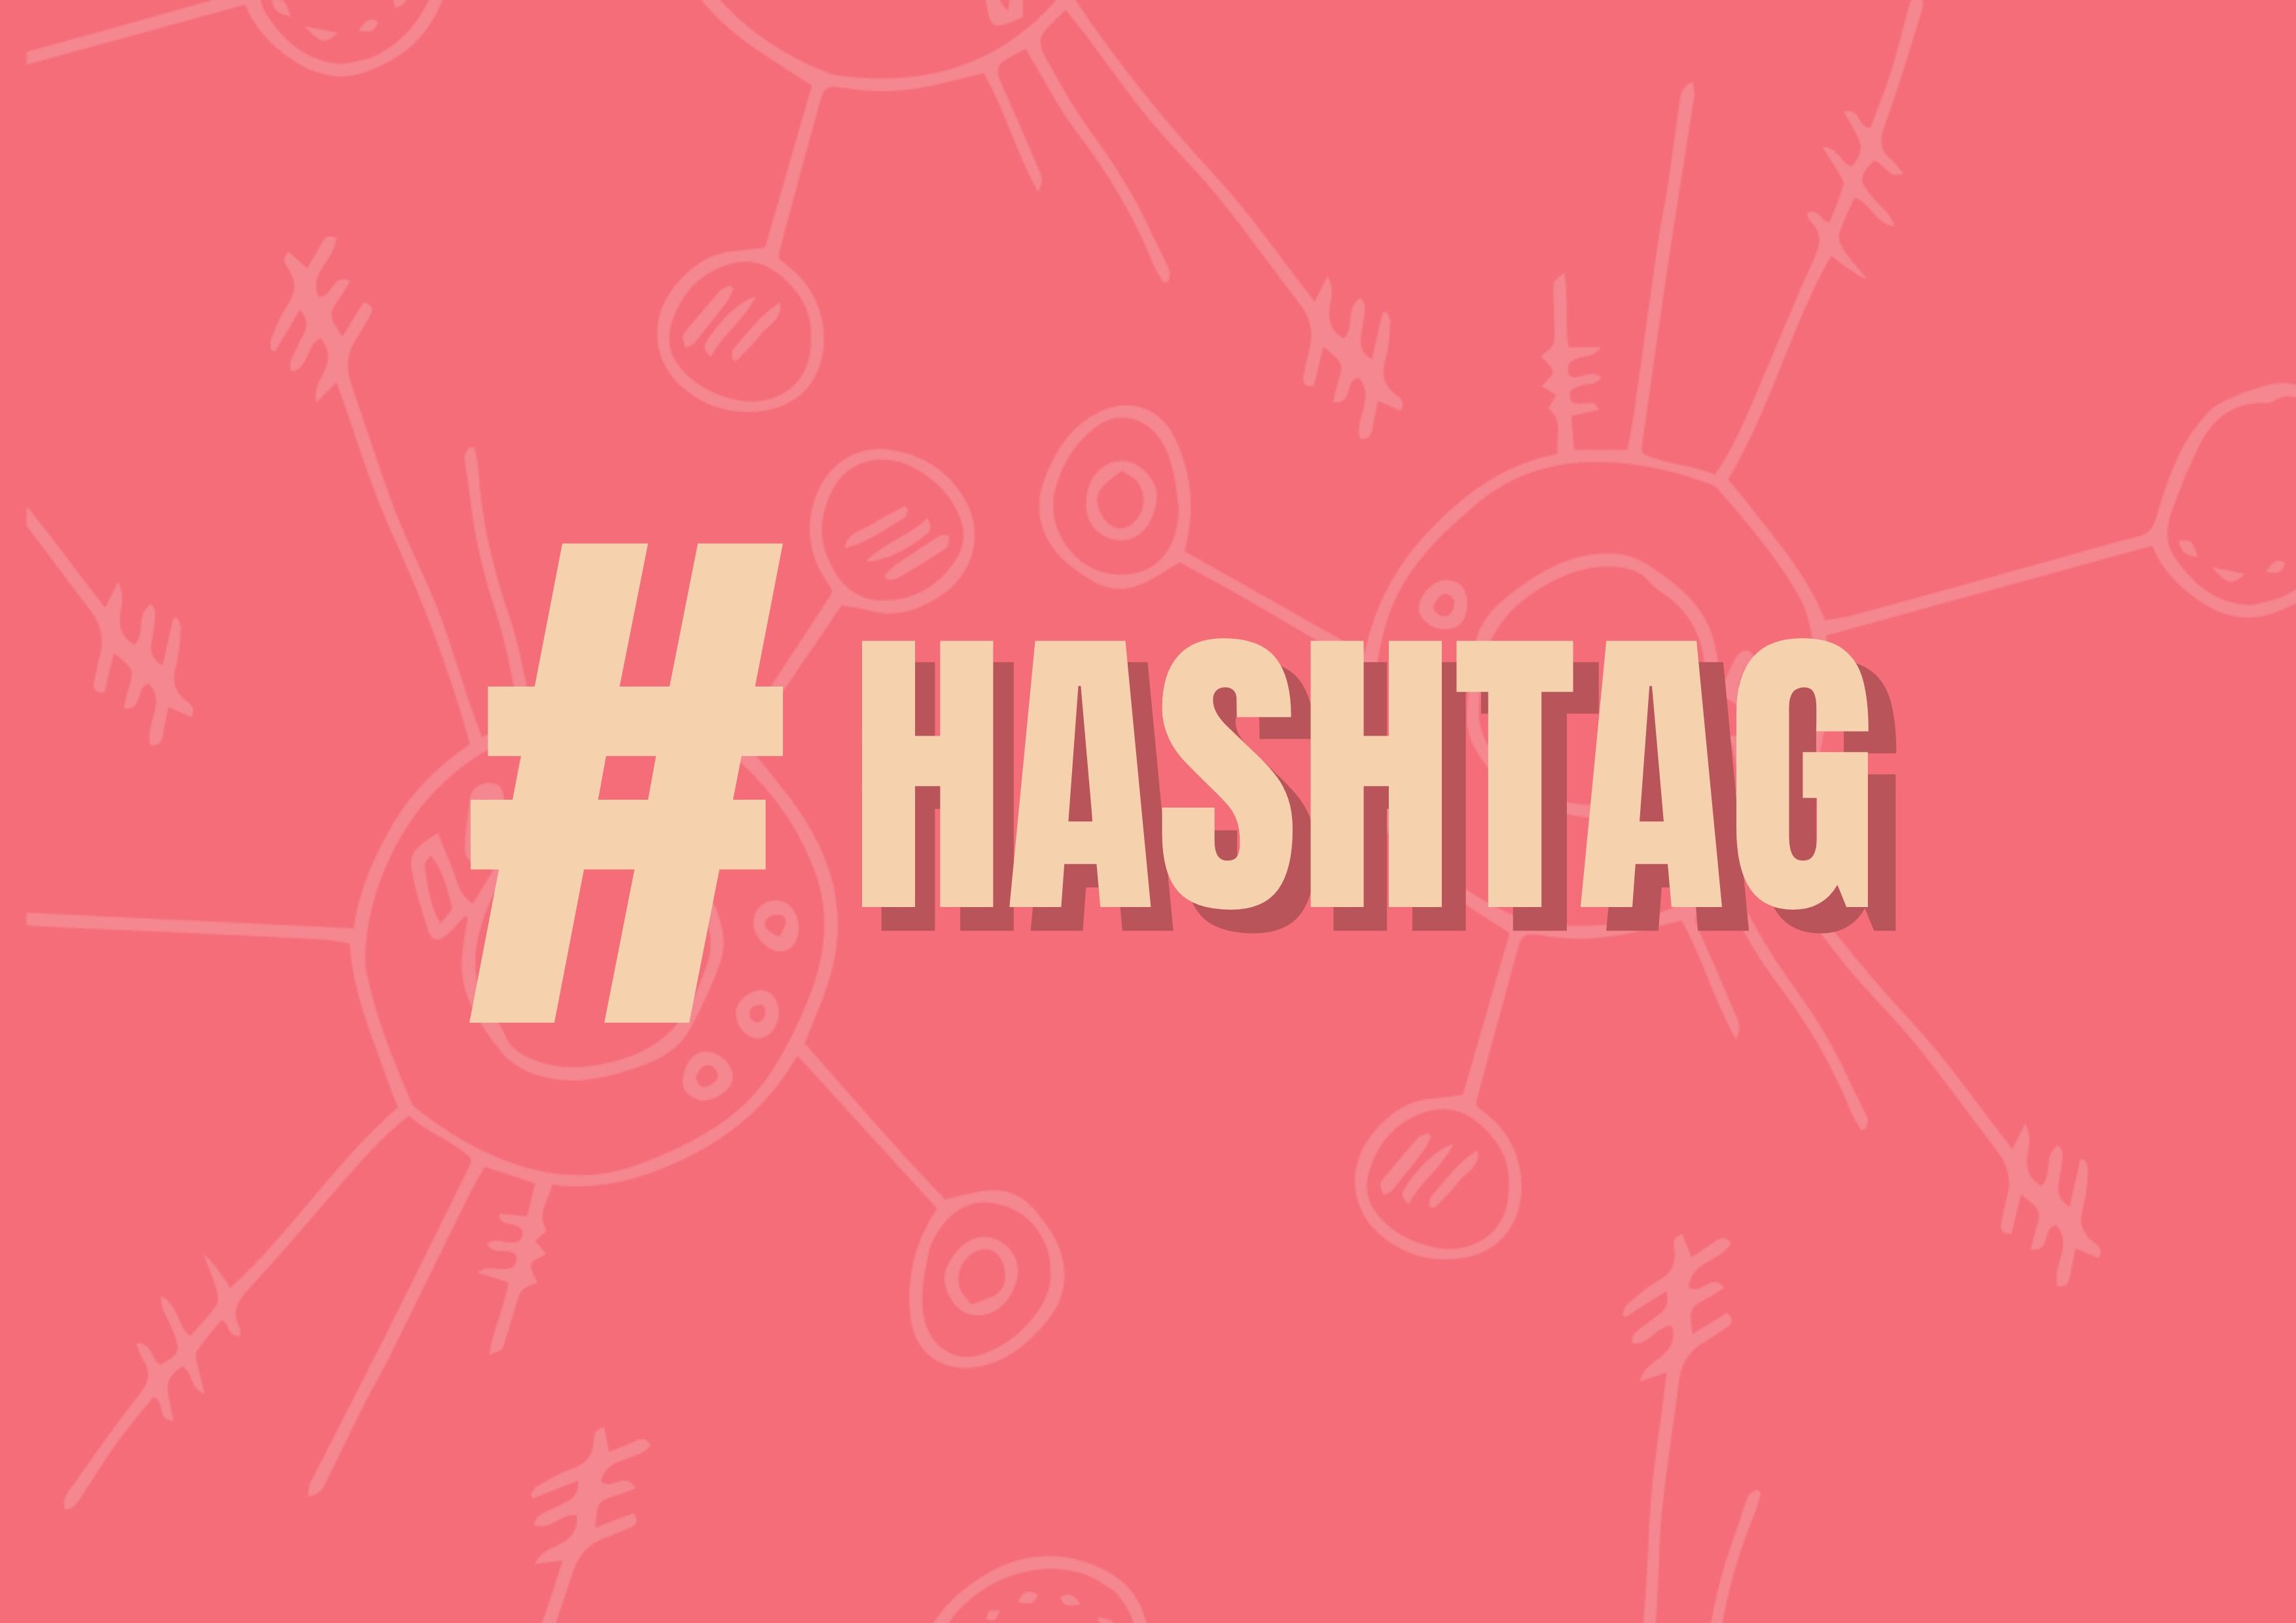 Red background with "#hashtag" written in yellow as a title - Why you might need to change the hashtags in your posts - Image